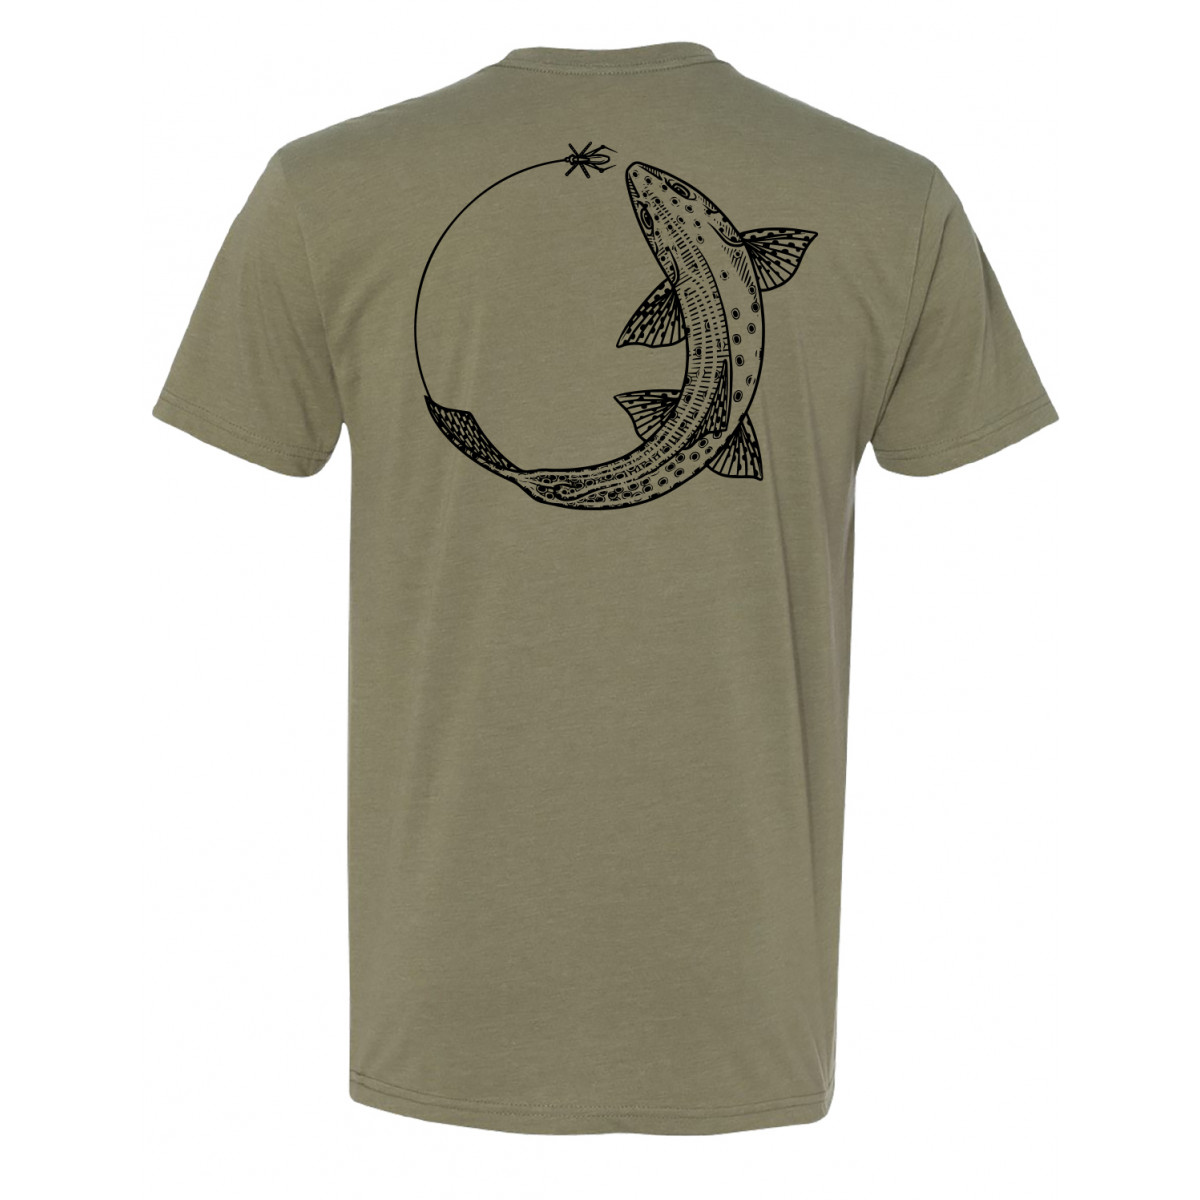 Chase Trout Tee (light olive)